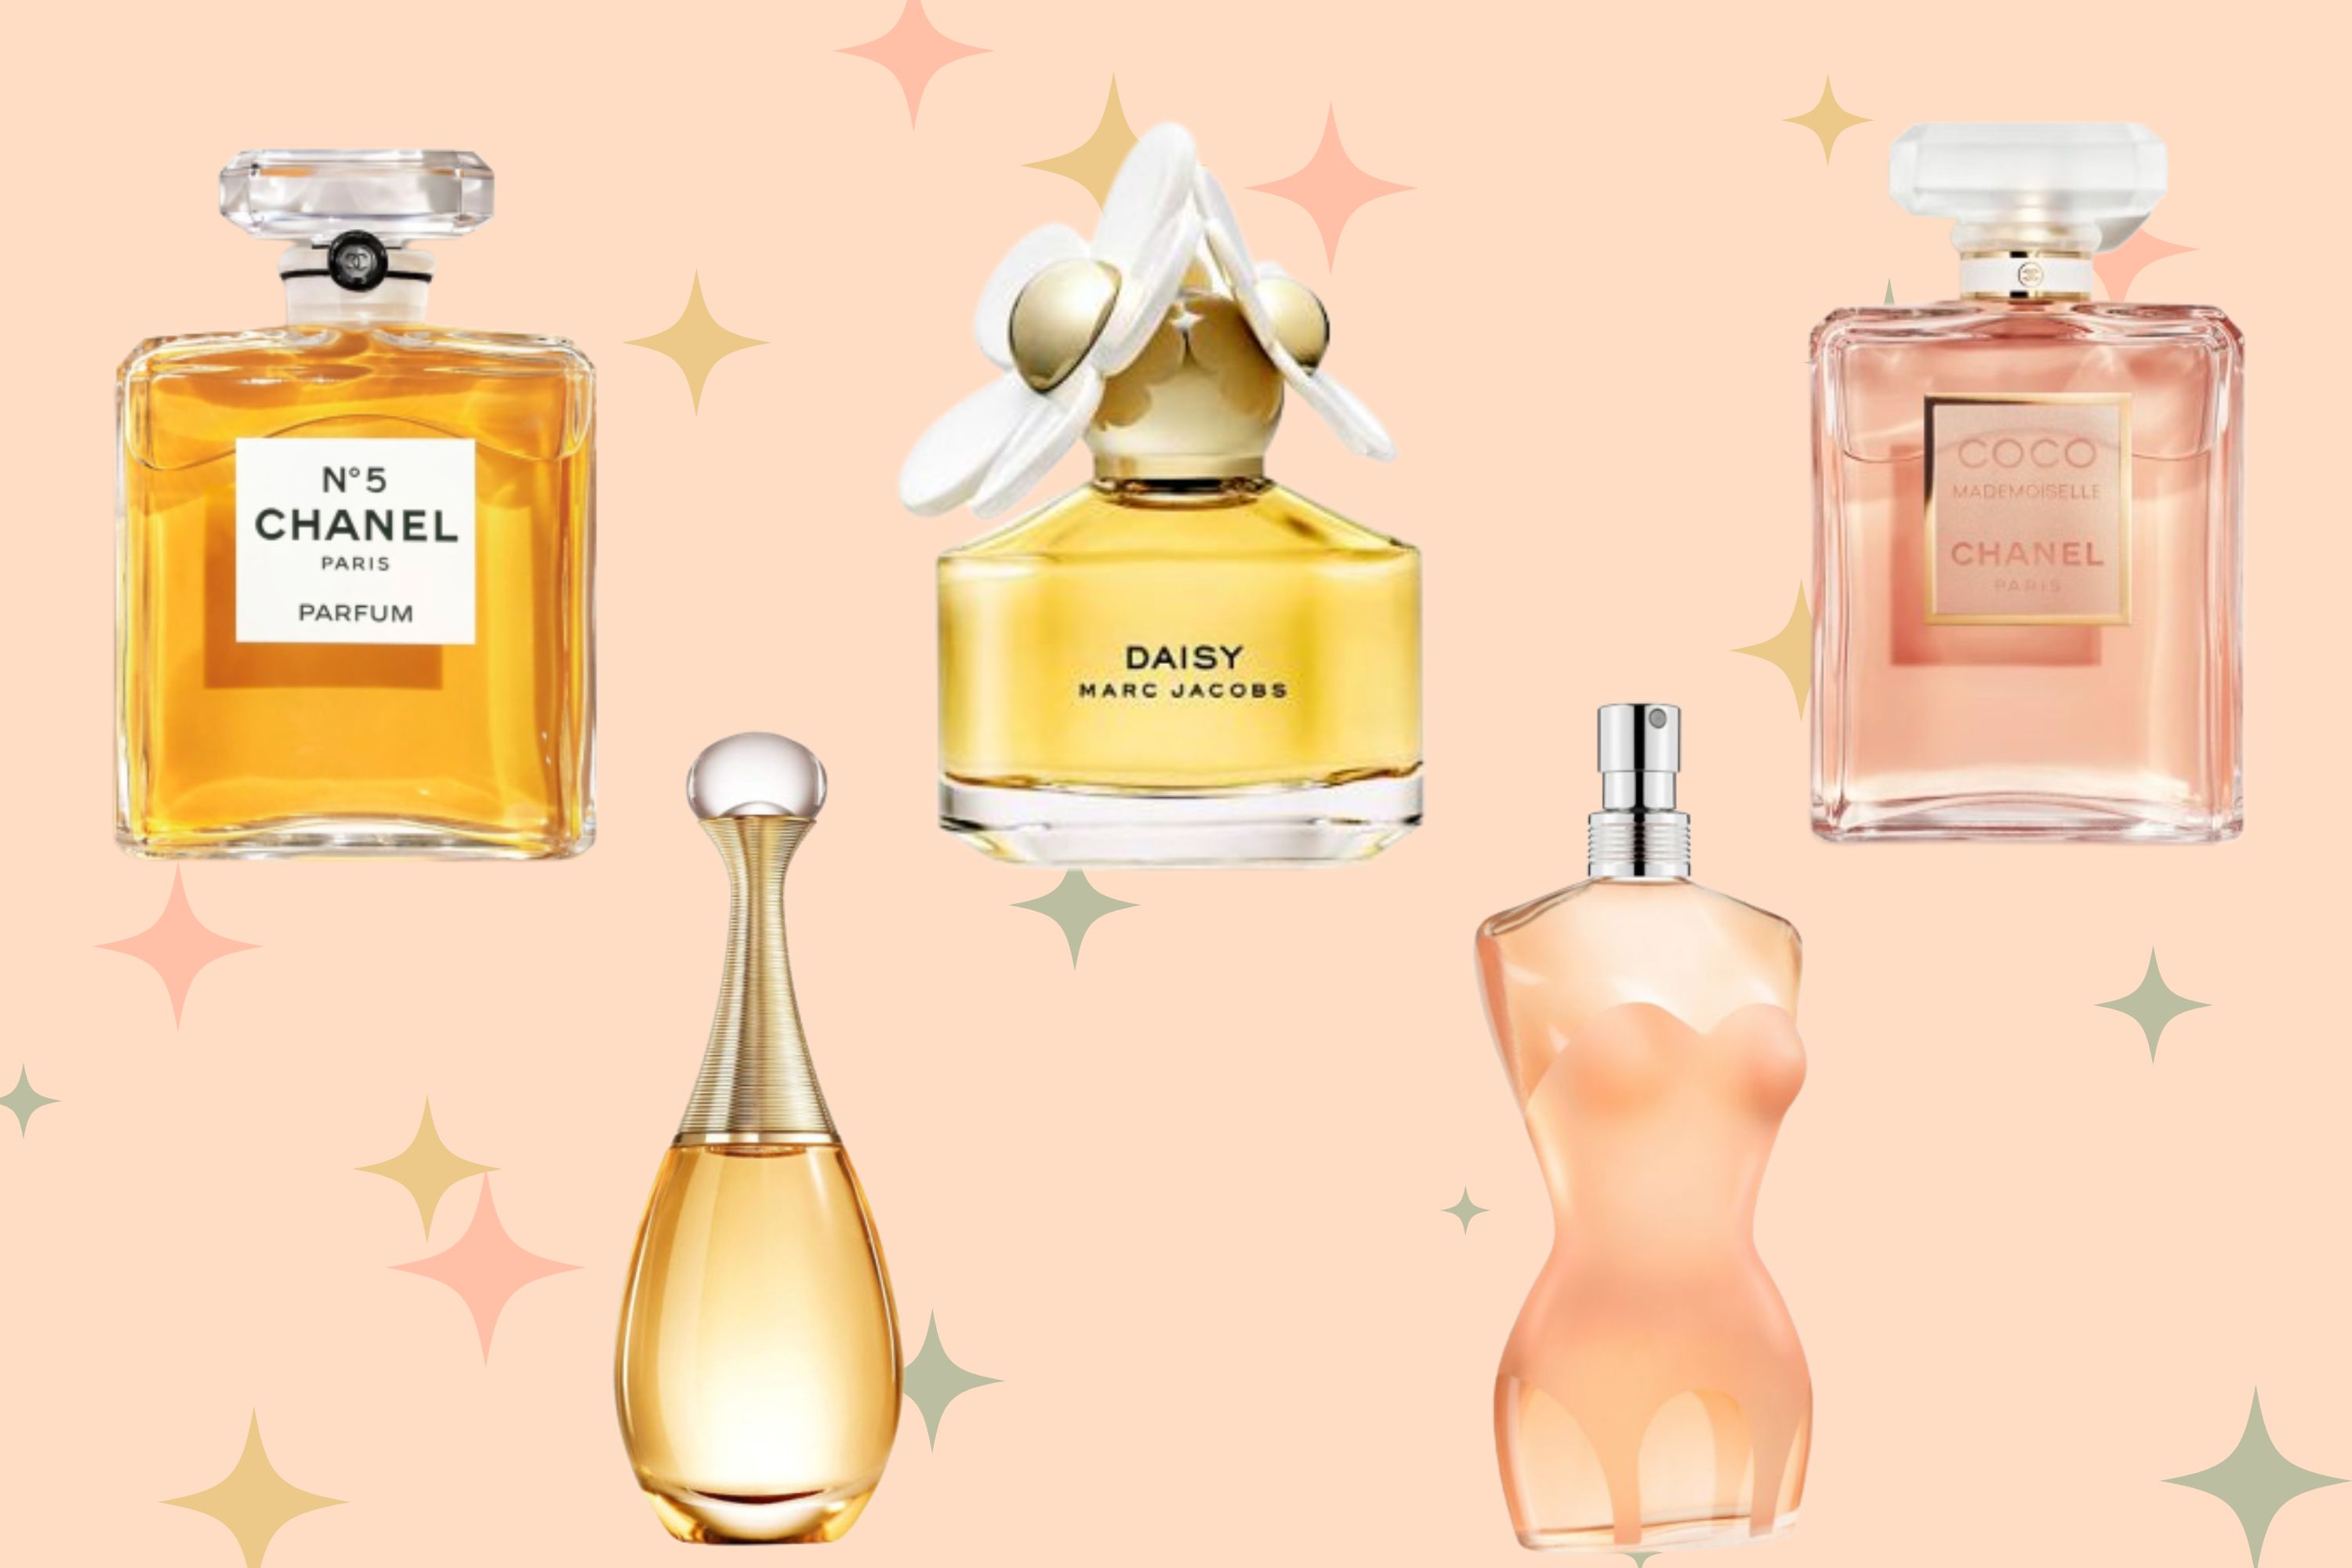 perfumes that smell like coco chanel mademoiselle